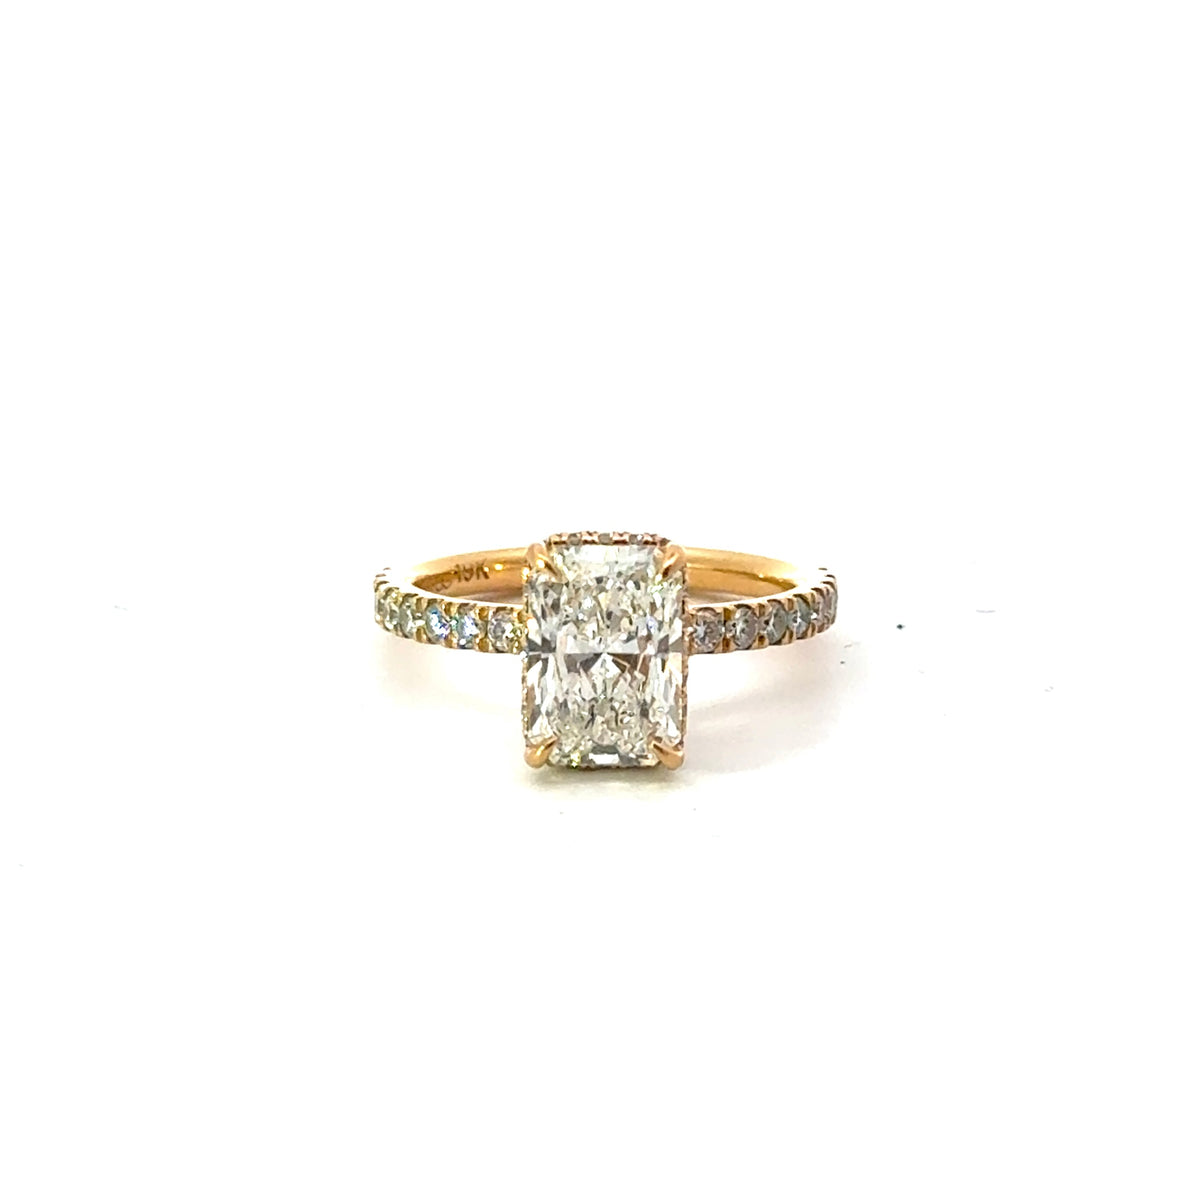 Radiant Cut Reverse Halo and Italian Pave Engagement Ring Design- Choice of .50ct / .80ct / 1.00ct or 1.20ct Centre Diamond